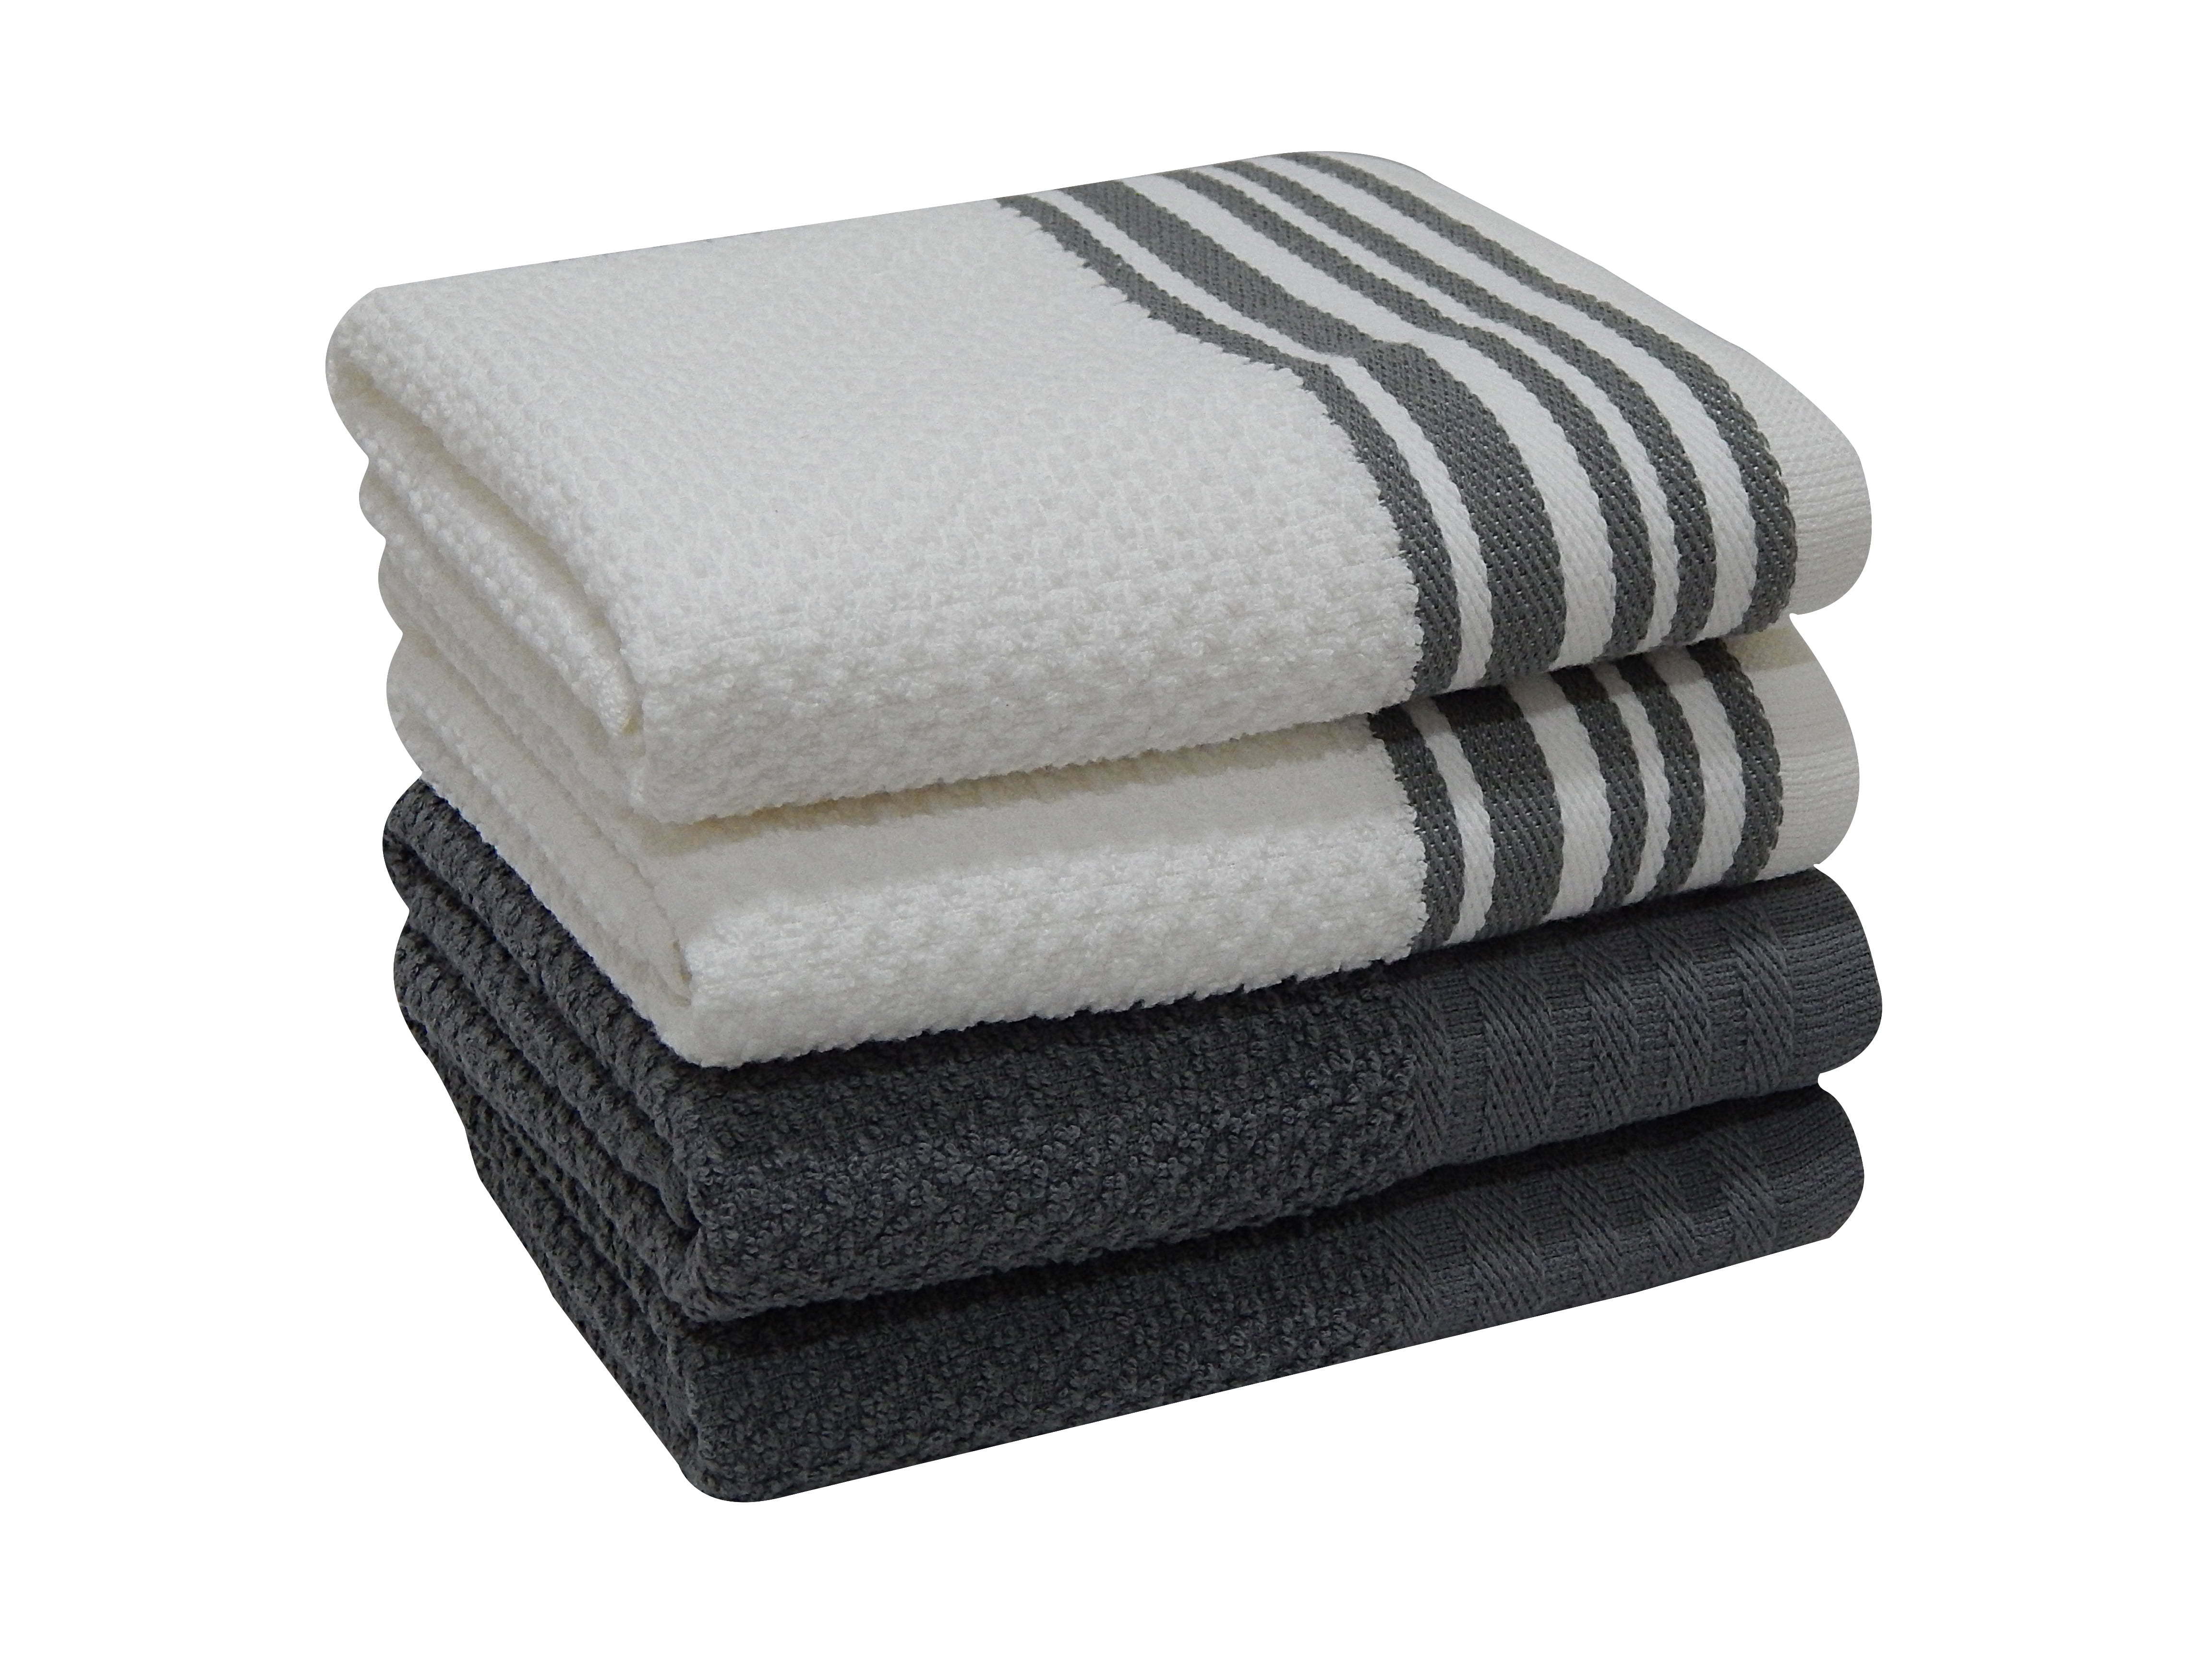 WOVEN KITCHEN TOWELS SET OF 4, Grey-White, 18''x28''. – Chardin Home